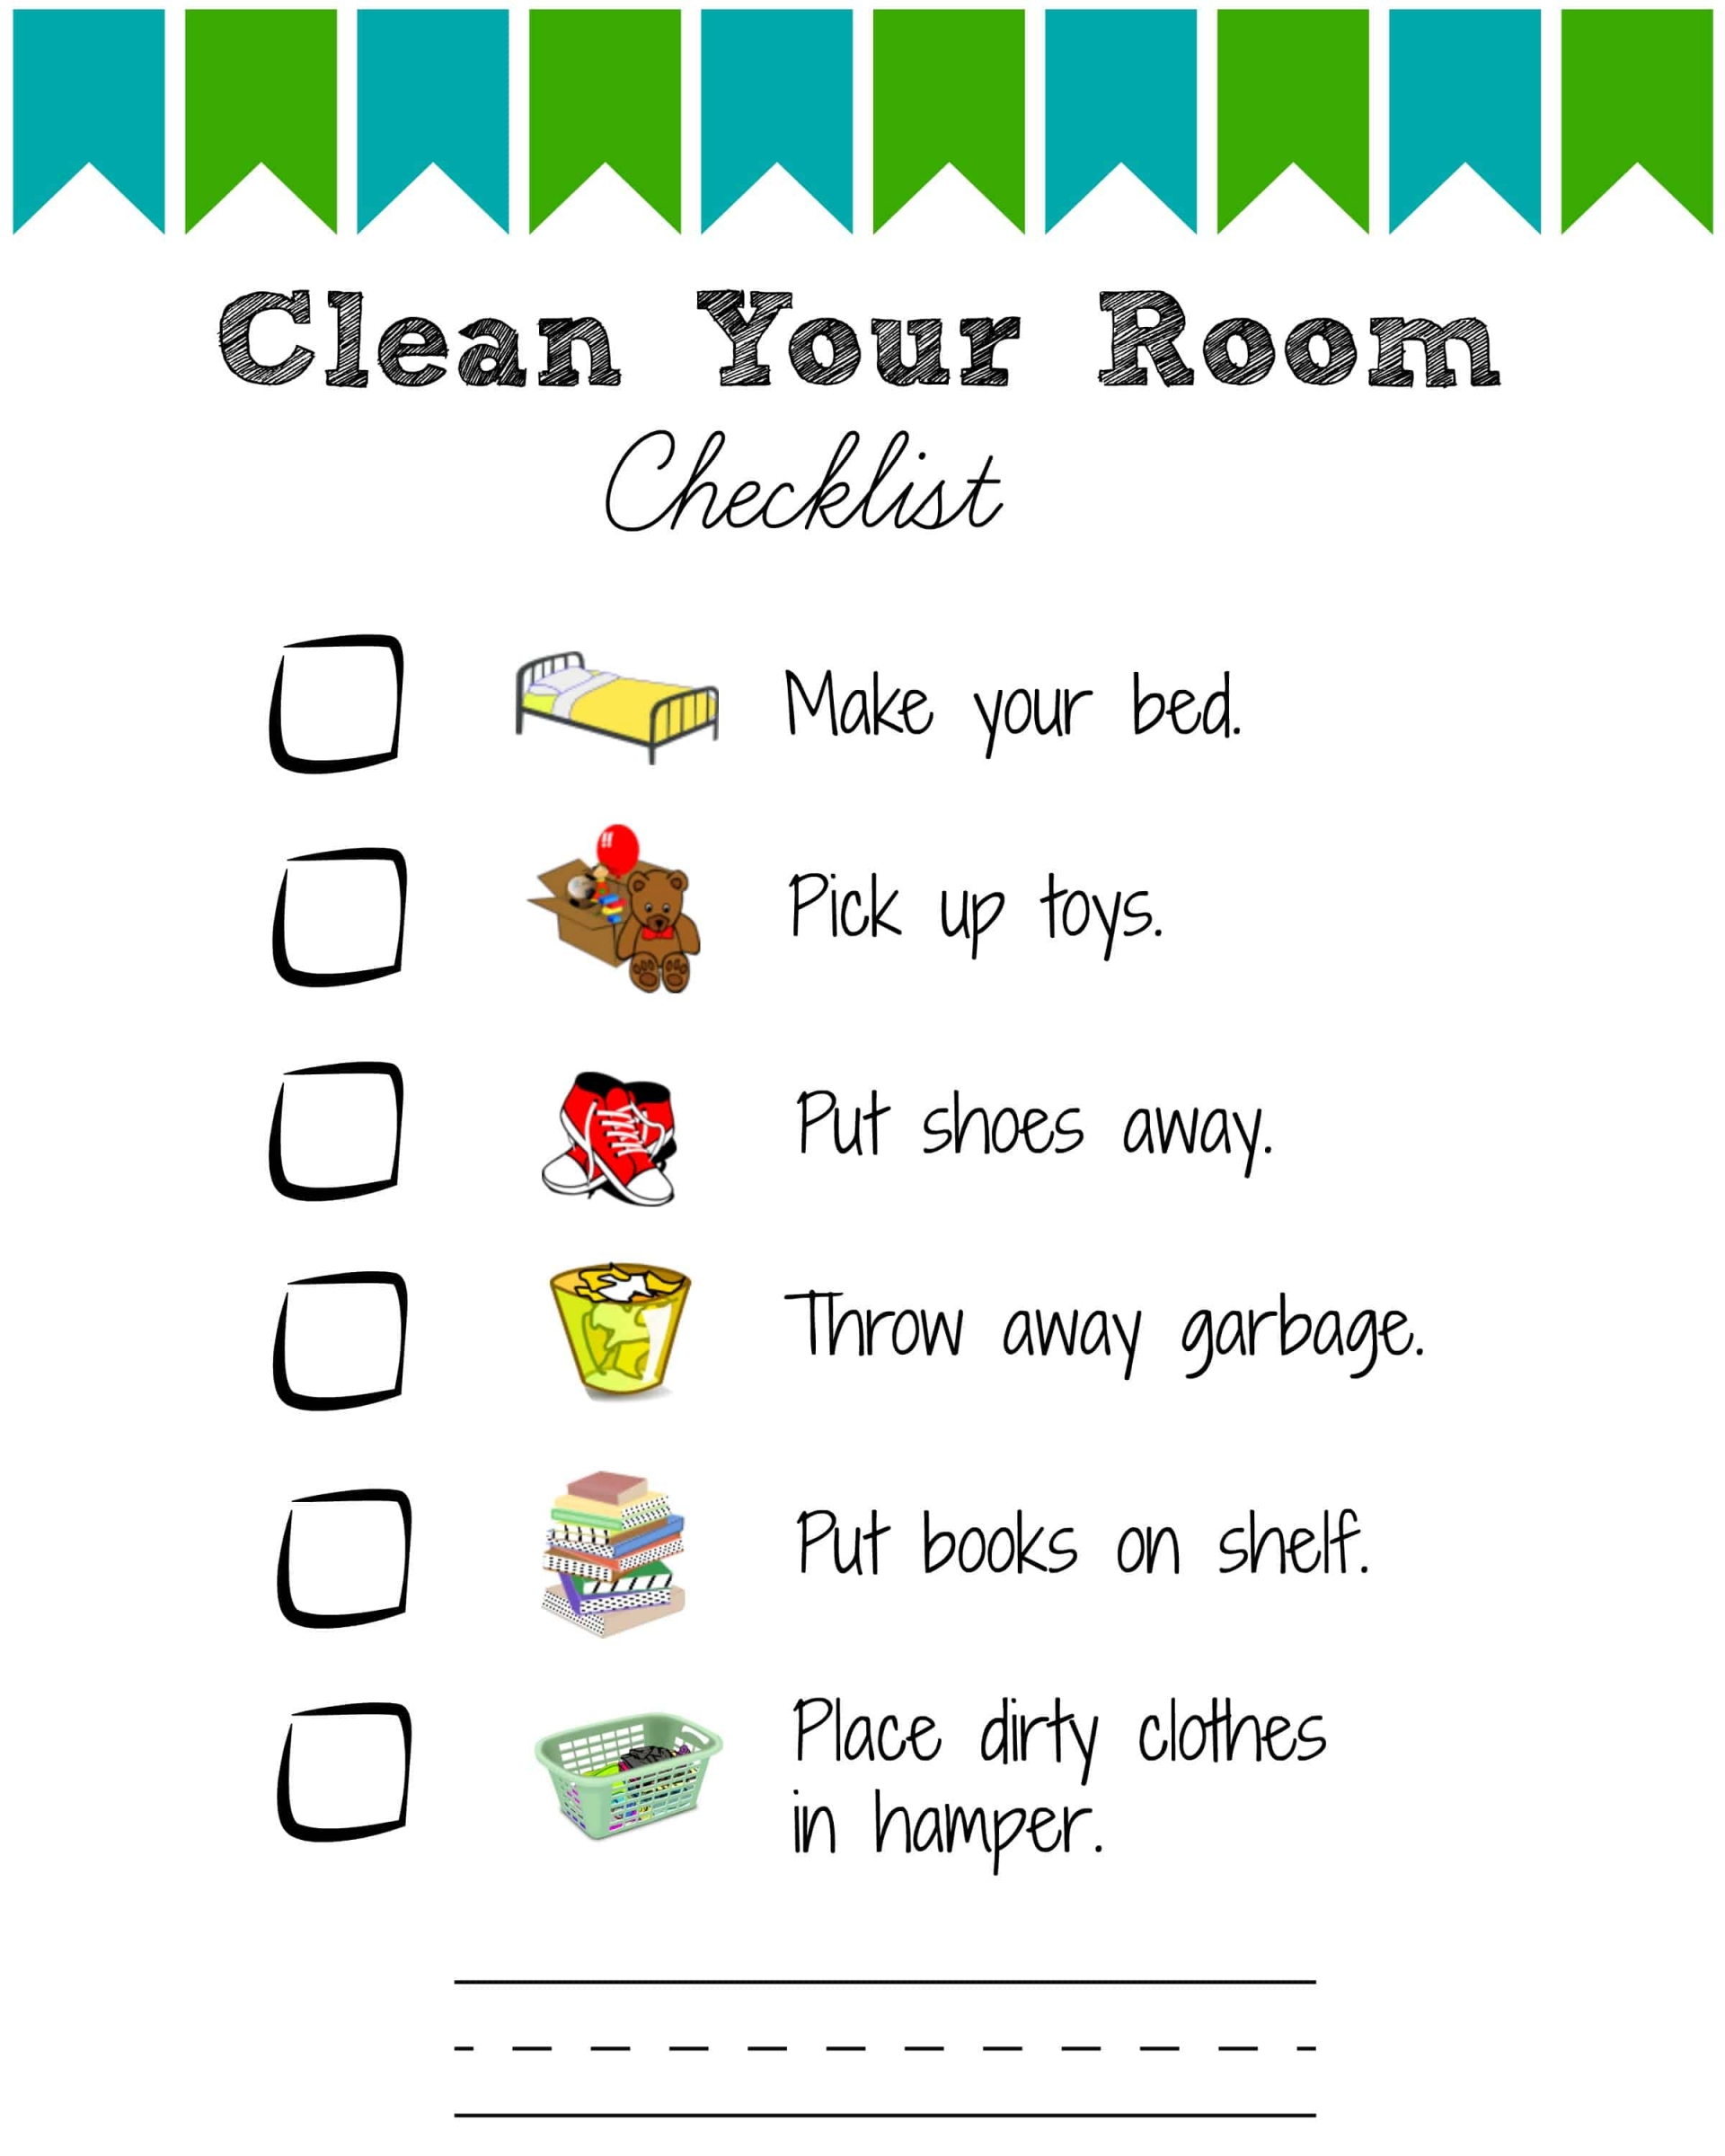 How to Clean Your Room in a Fast and Fun Way: Cleaning Tips for